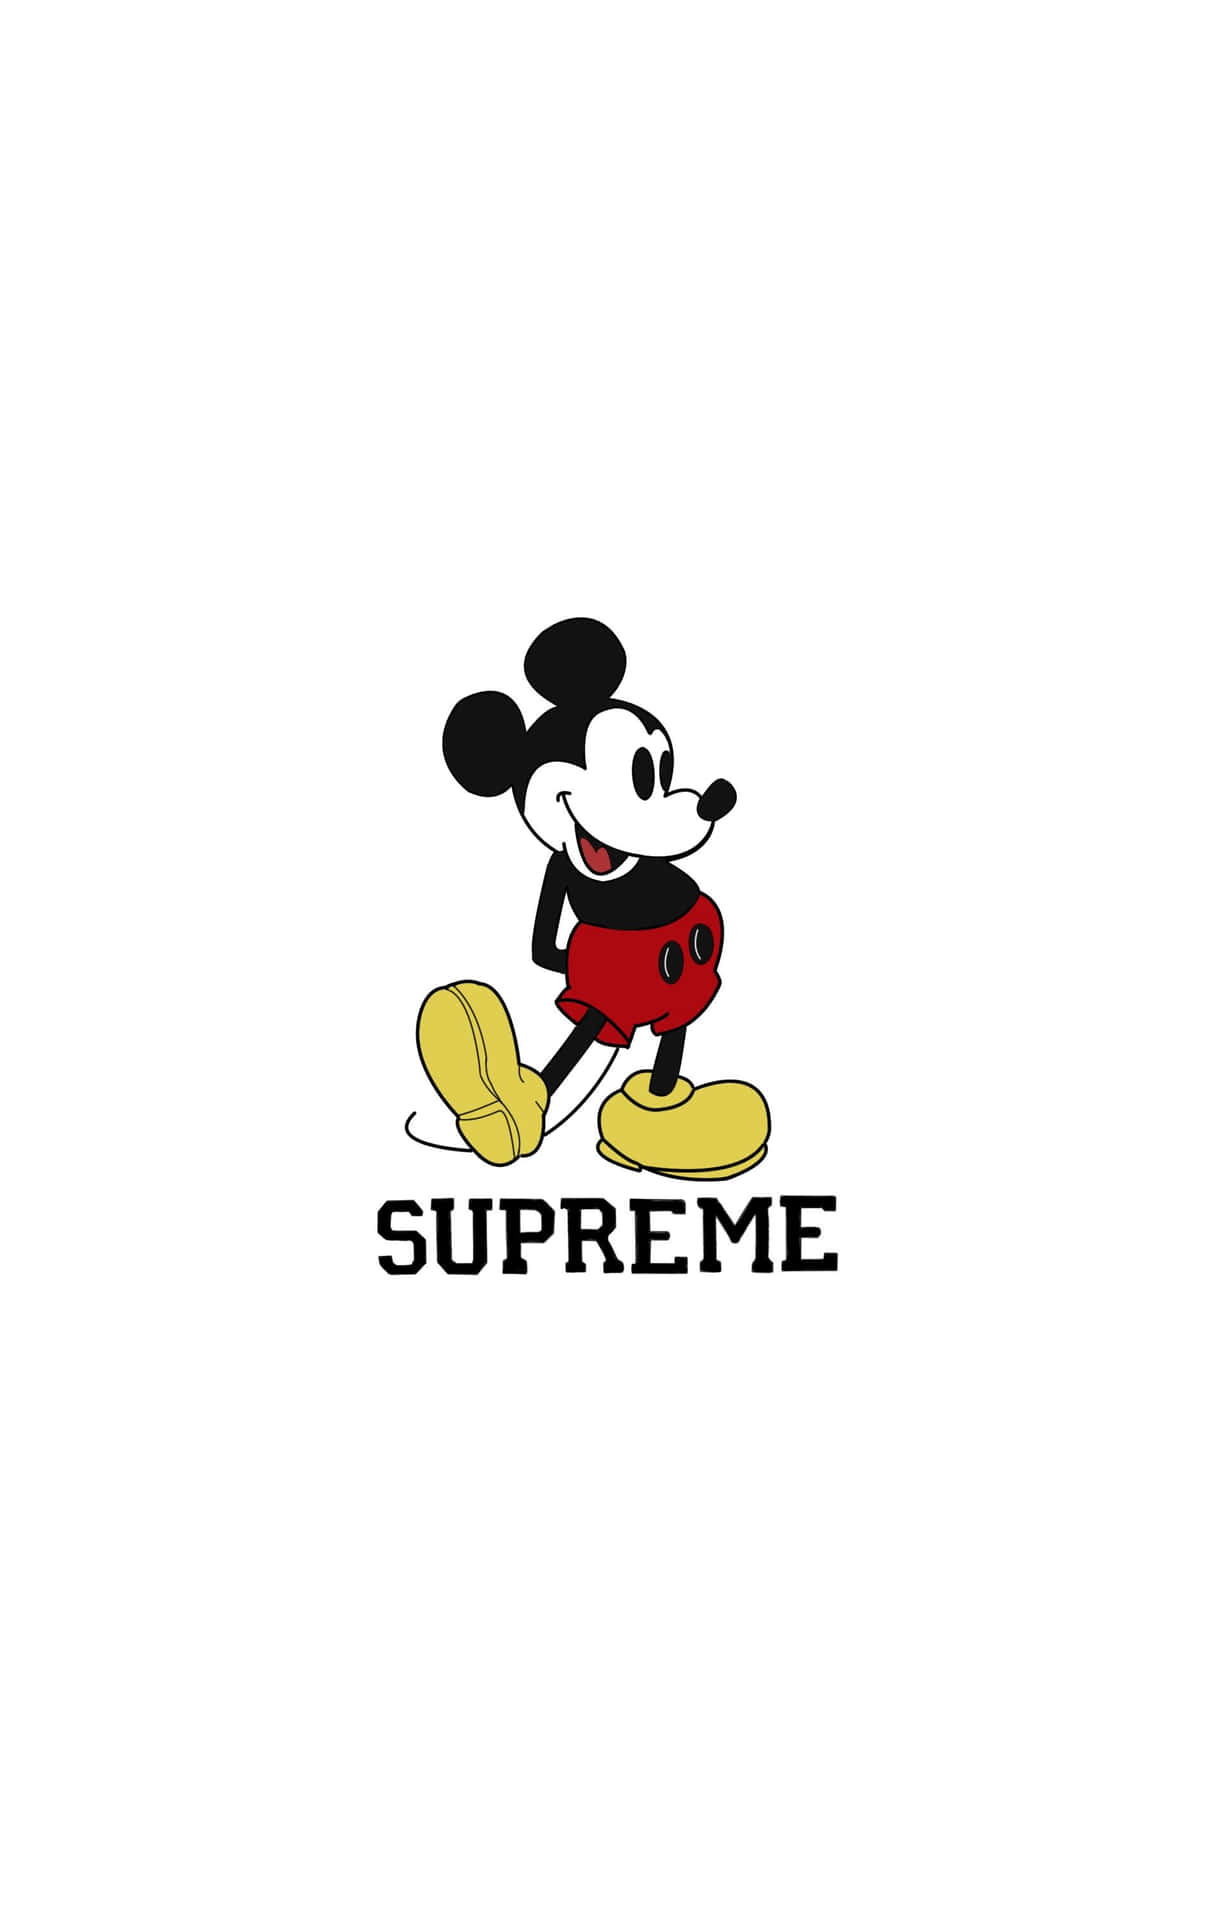 100+] Supreme Iphone Wallpapers | Wallpapers.com